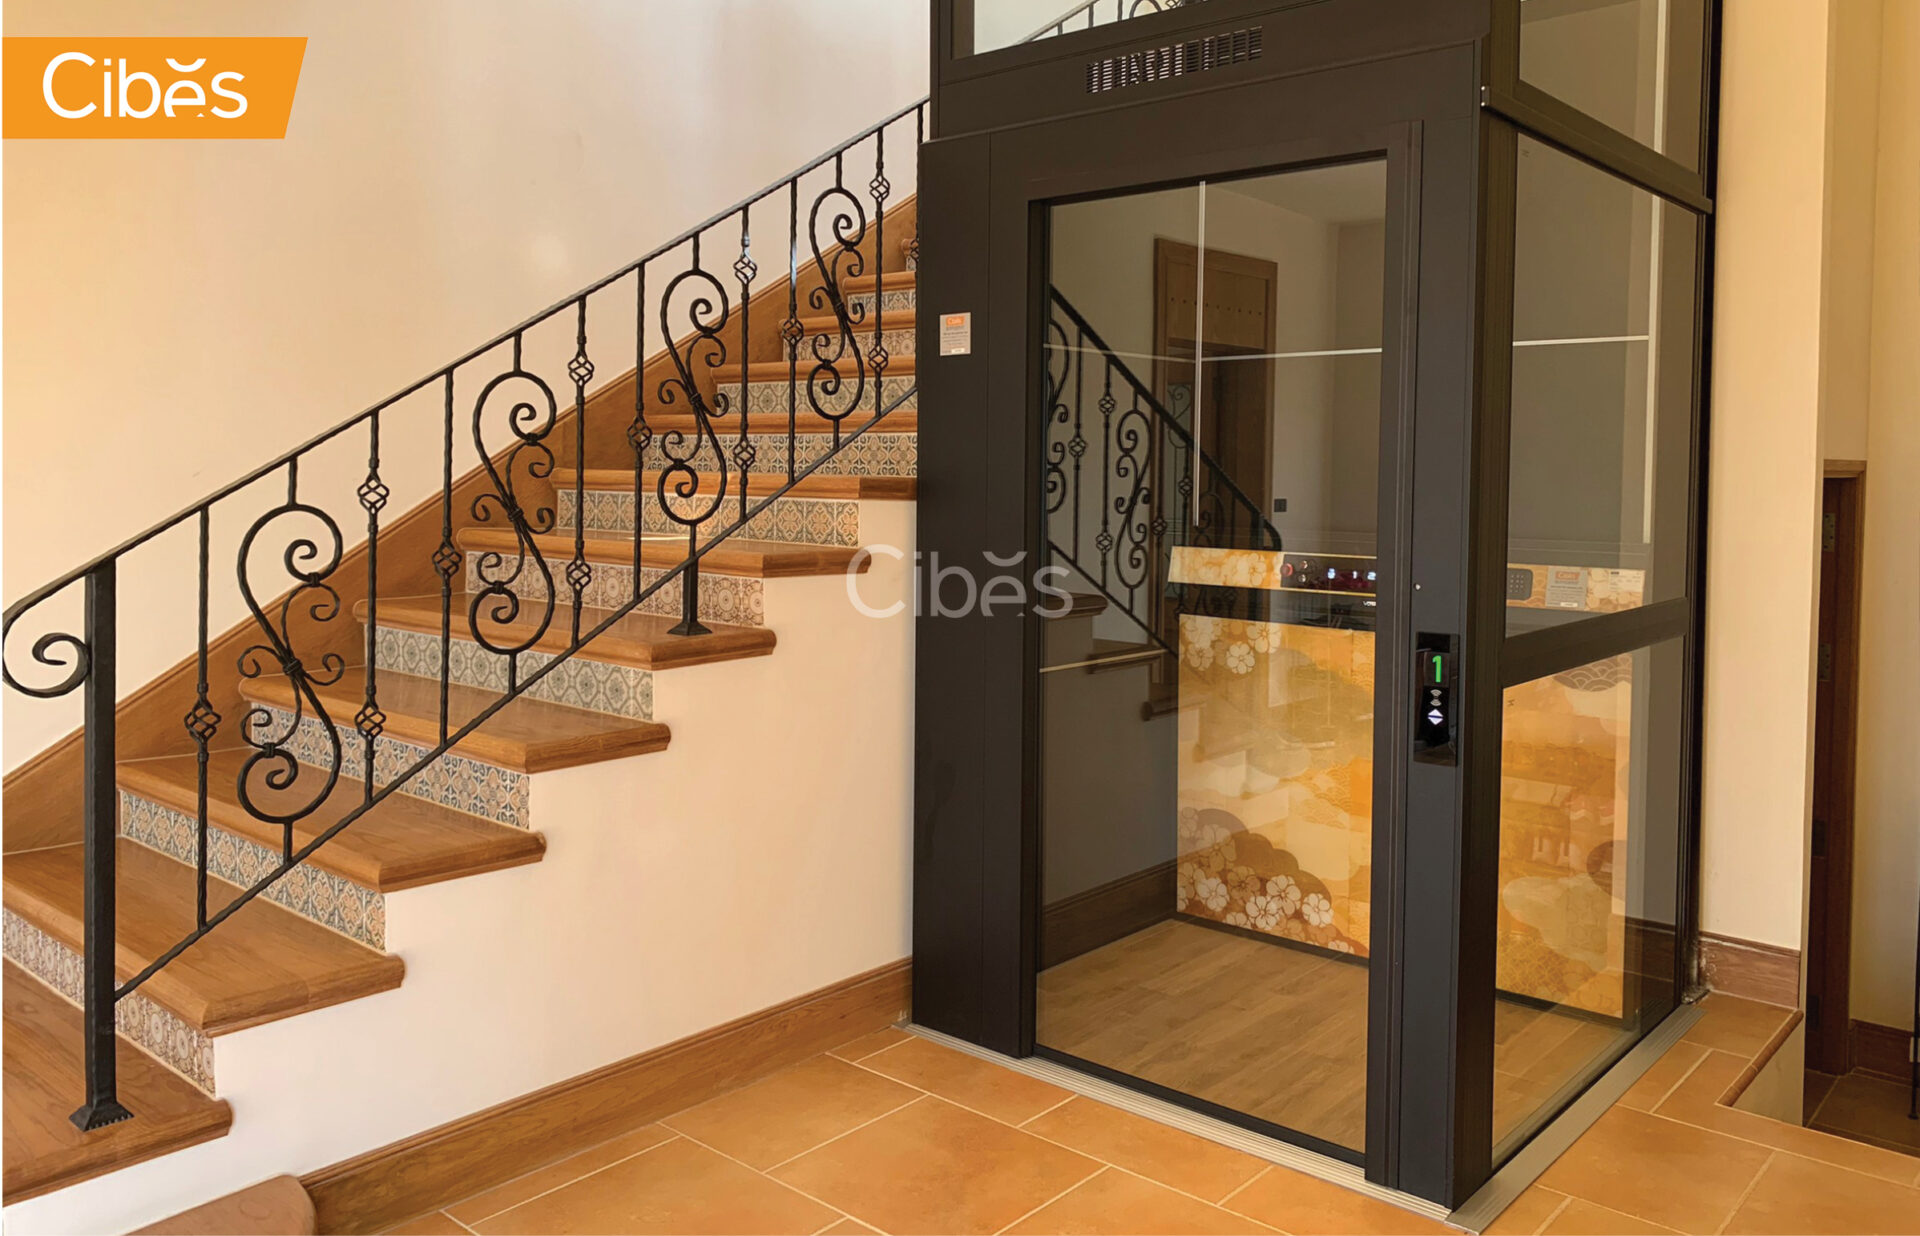 HOME LIFTS – Middle of stairs au28